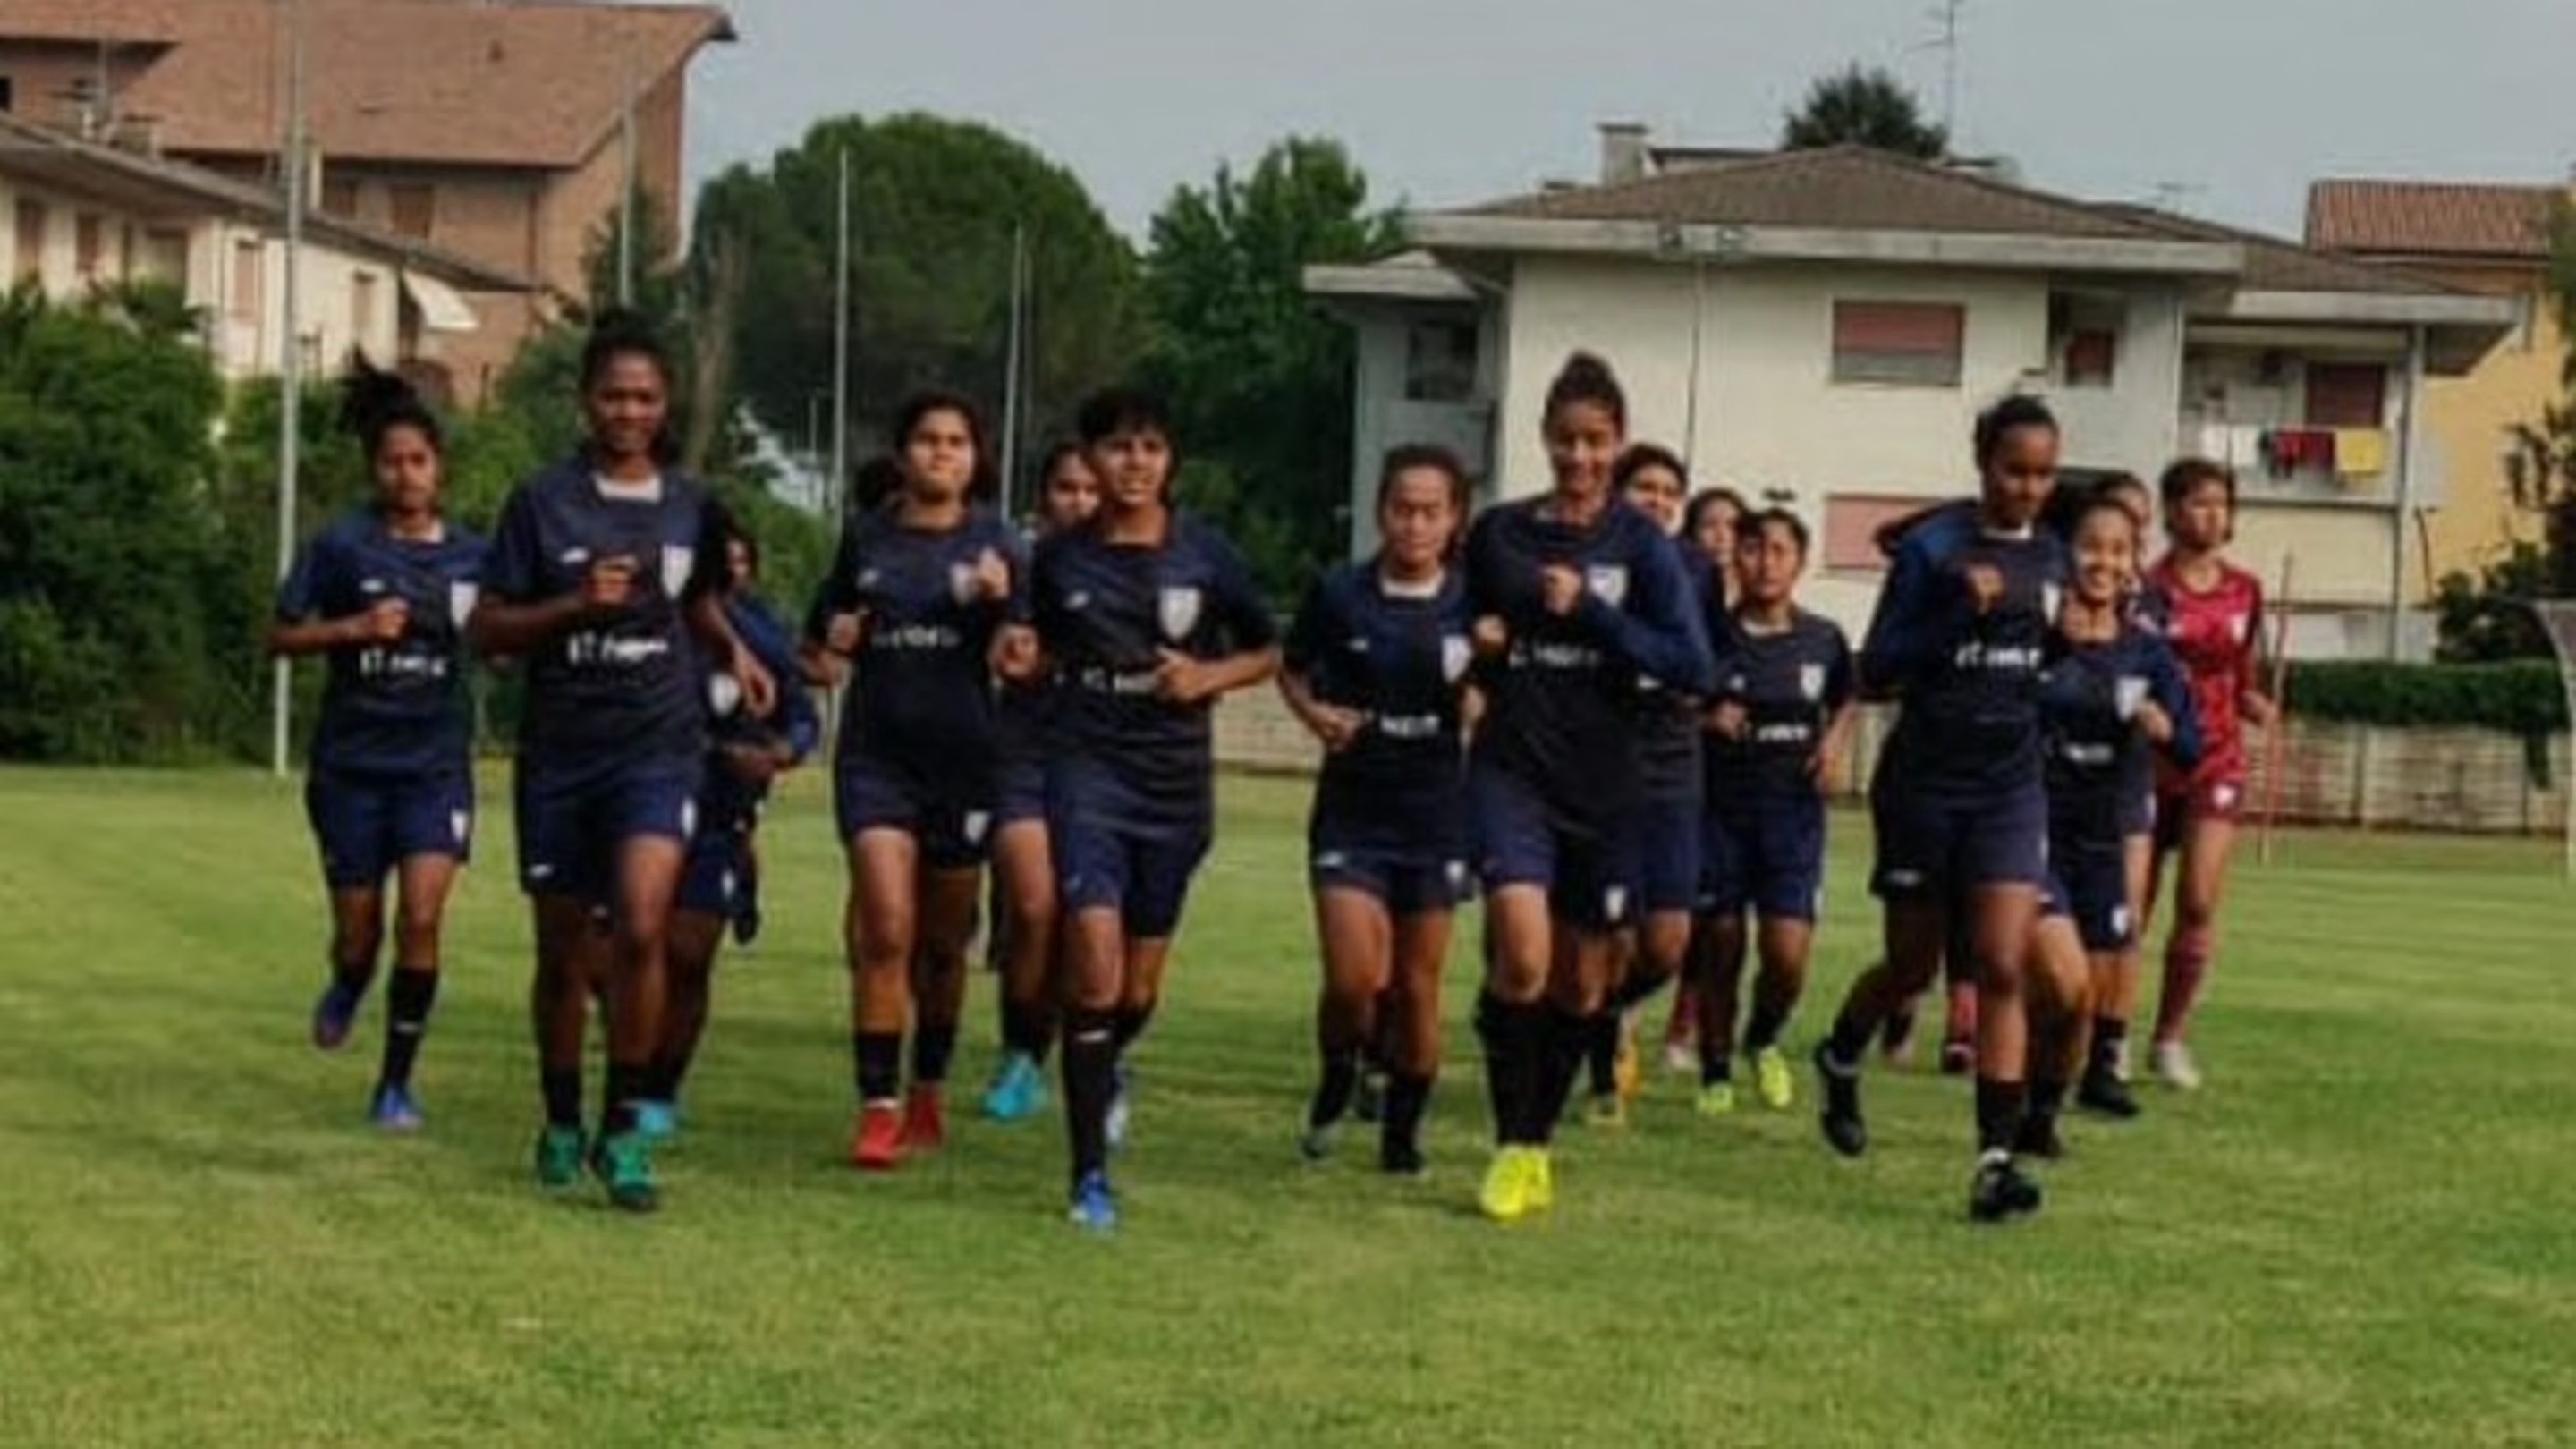 India Football: Women's Under-17 side lose 2-0 to Mexico in final game of 6th Torneo Female Football Tournament